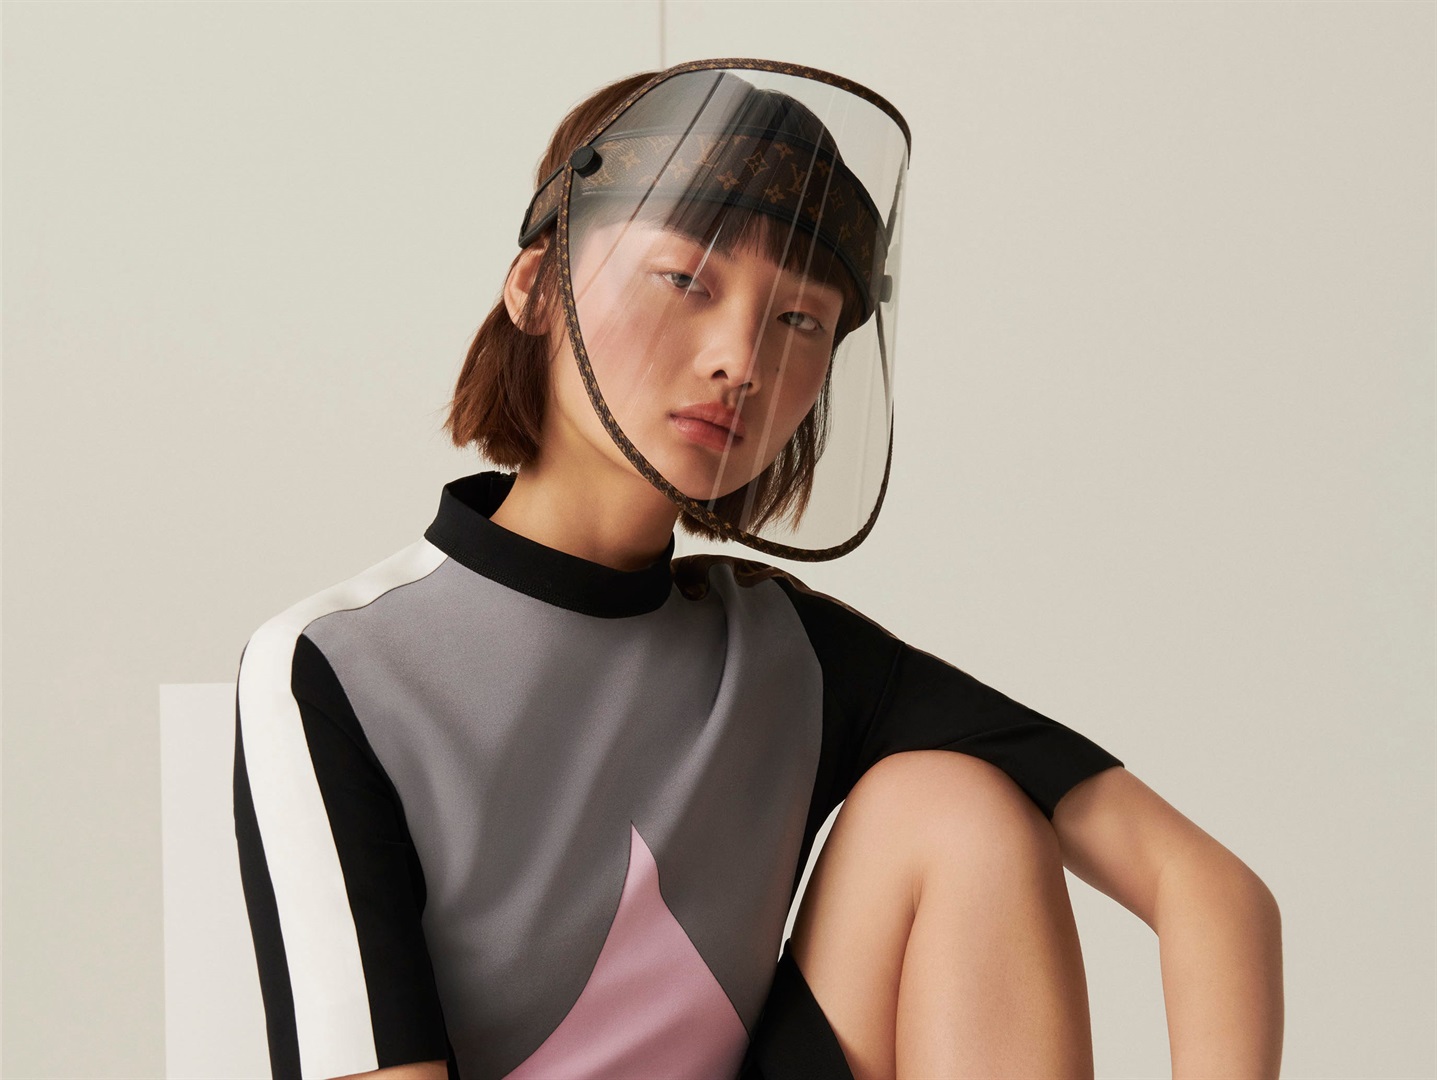 Louis Vuitton just unveiled a luxury face shield, at a reported R16,000 each